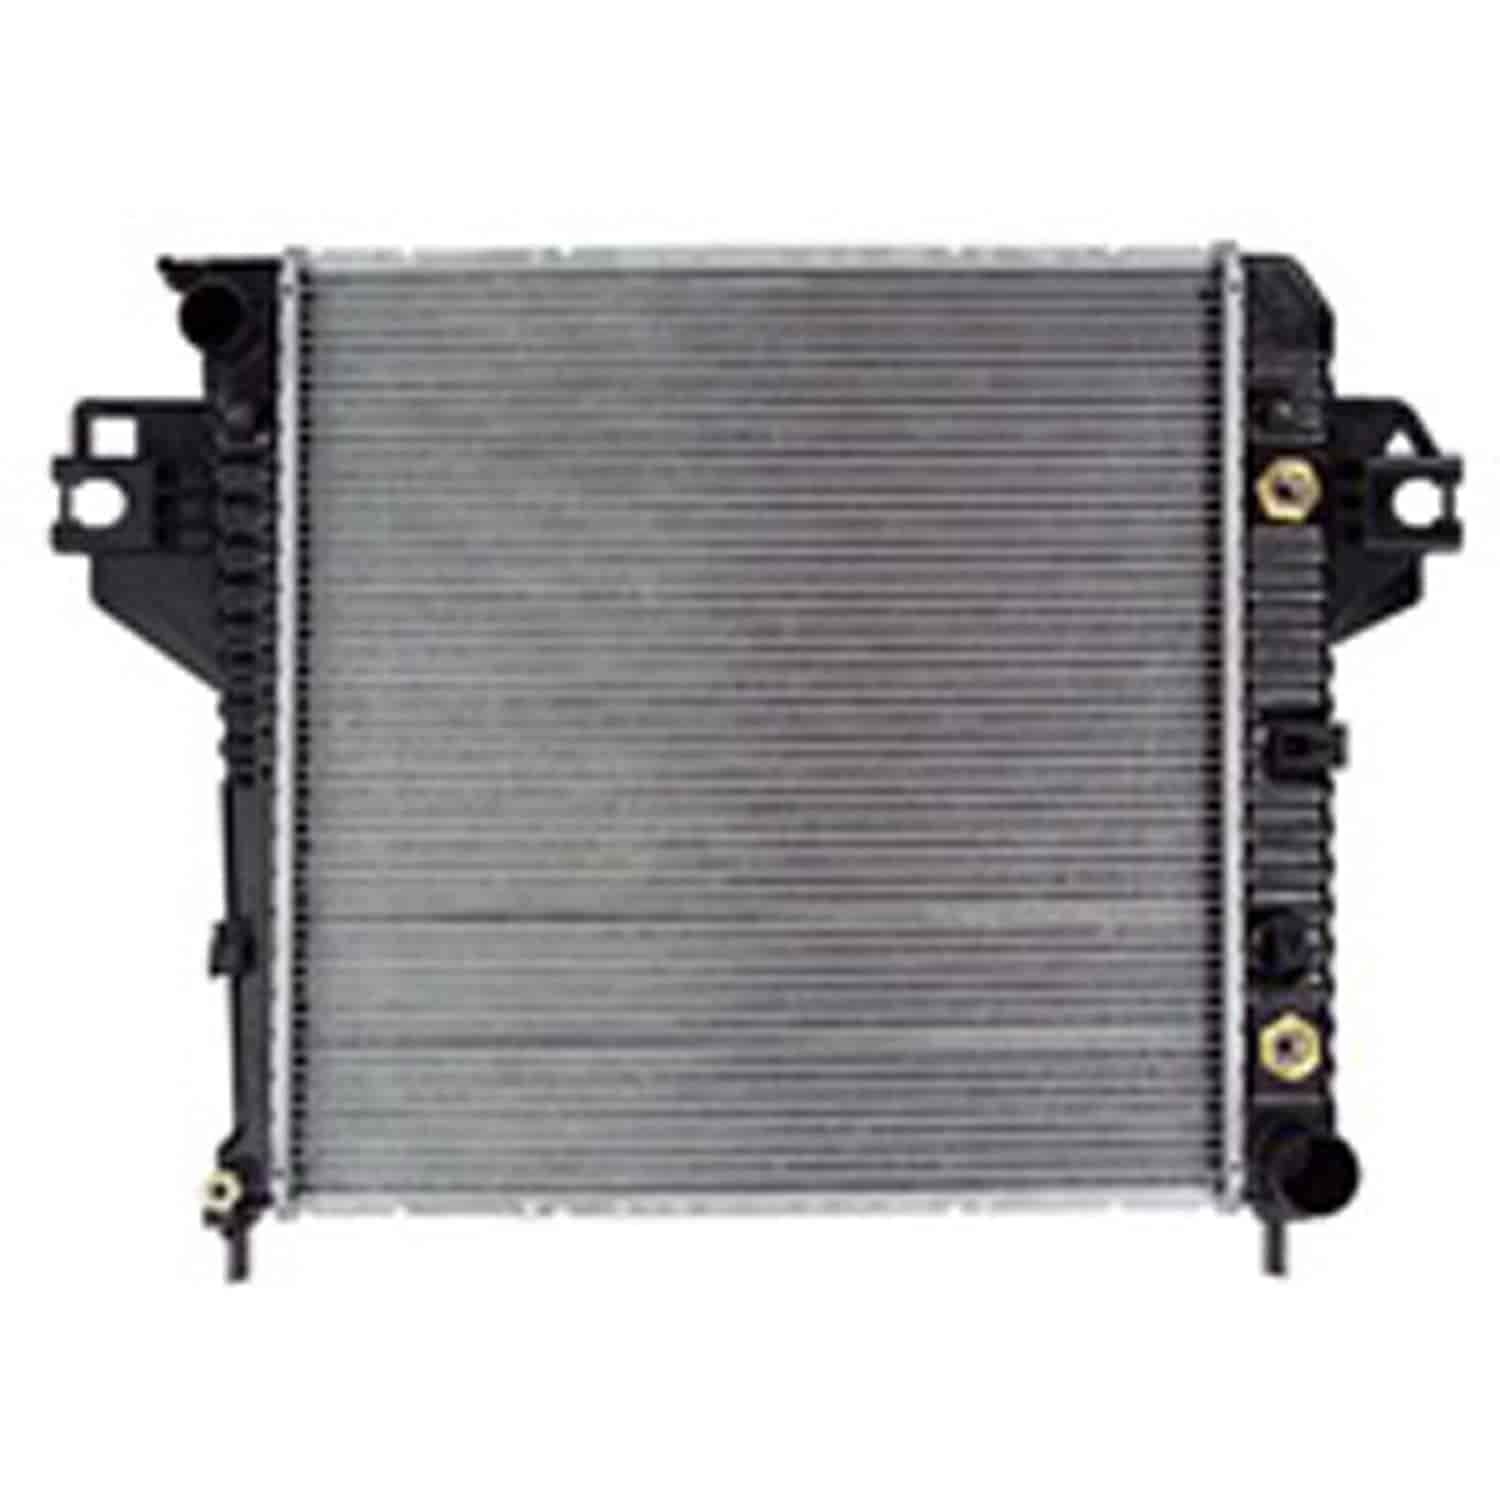 This 1 row radiator from Omix-ADA fits 02-06 Liberty 3.7L with or without AC.